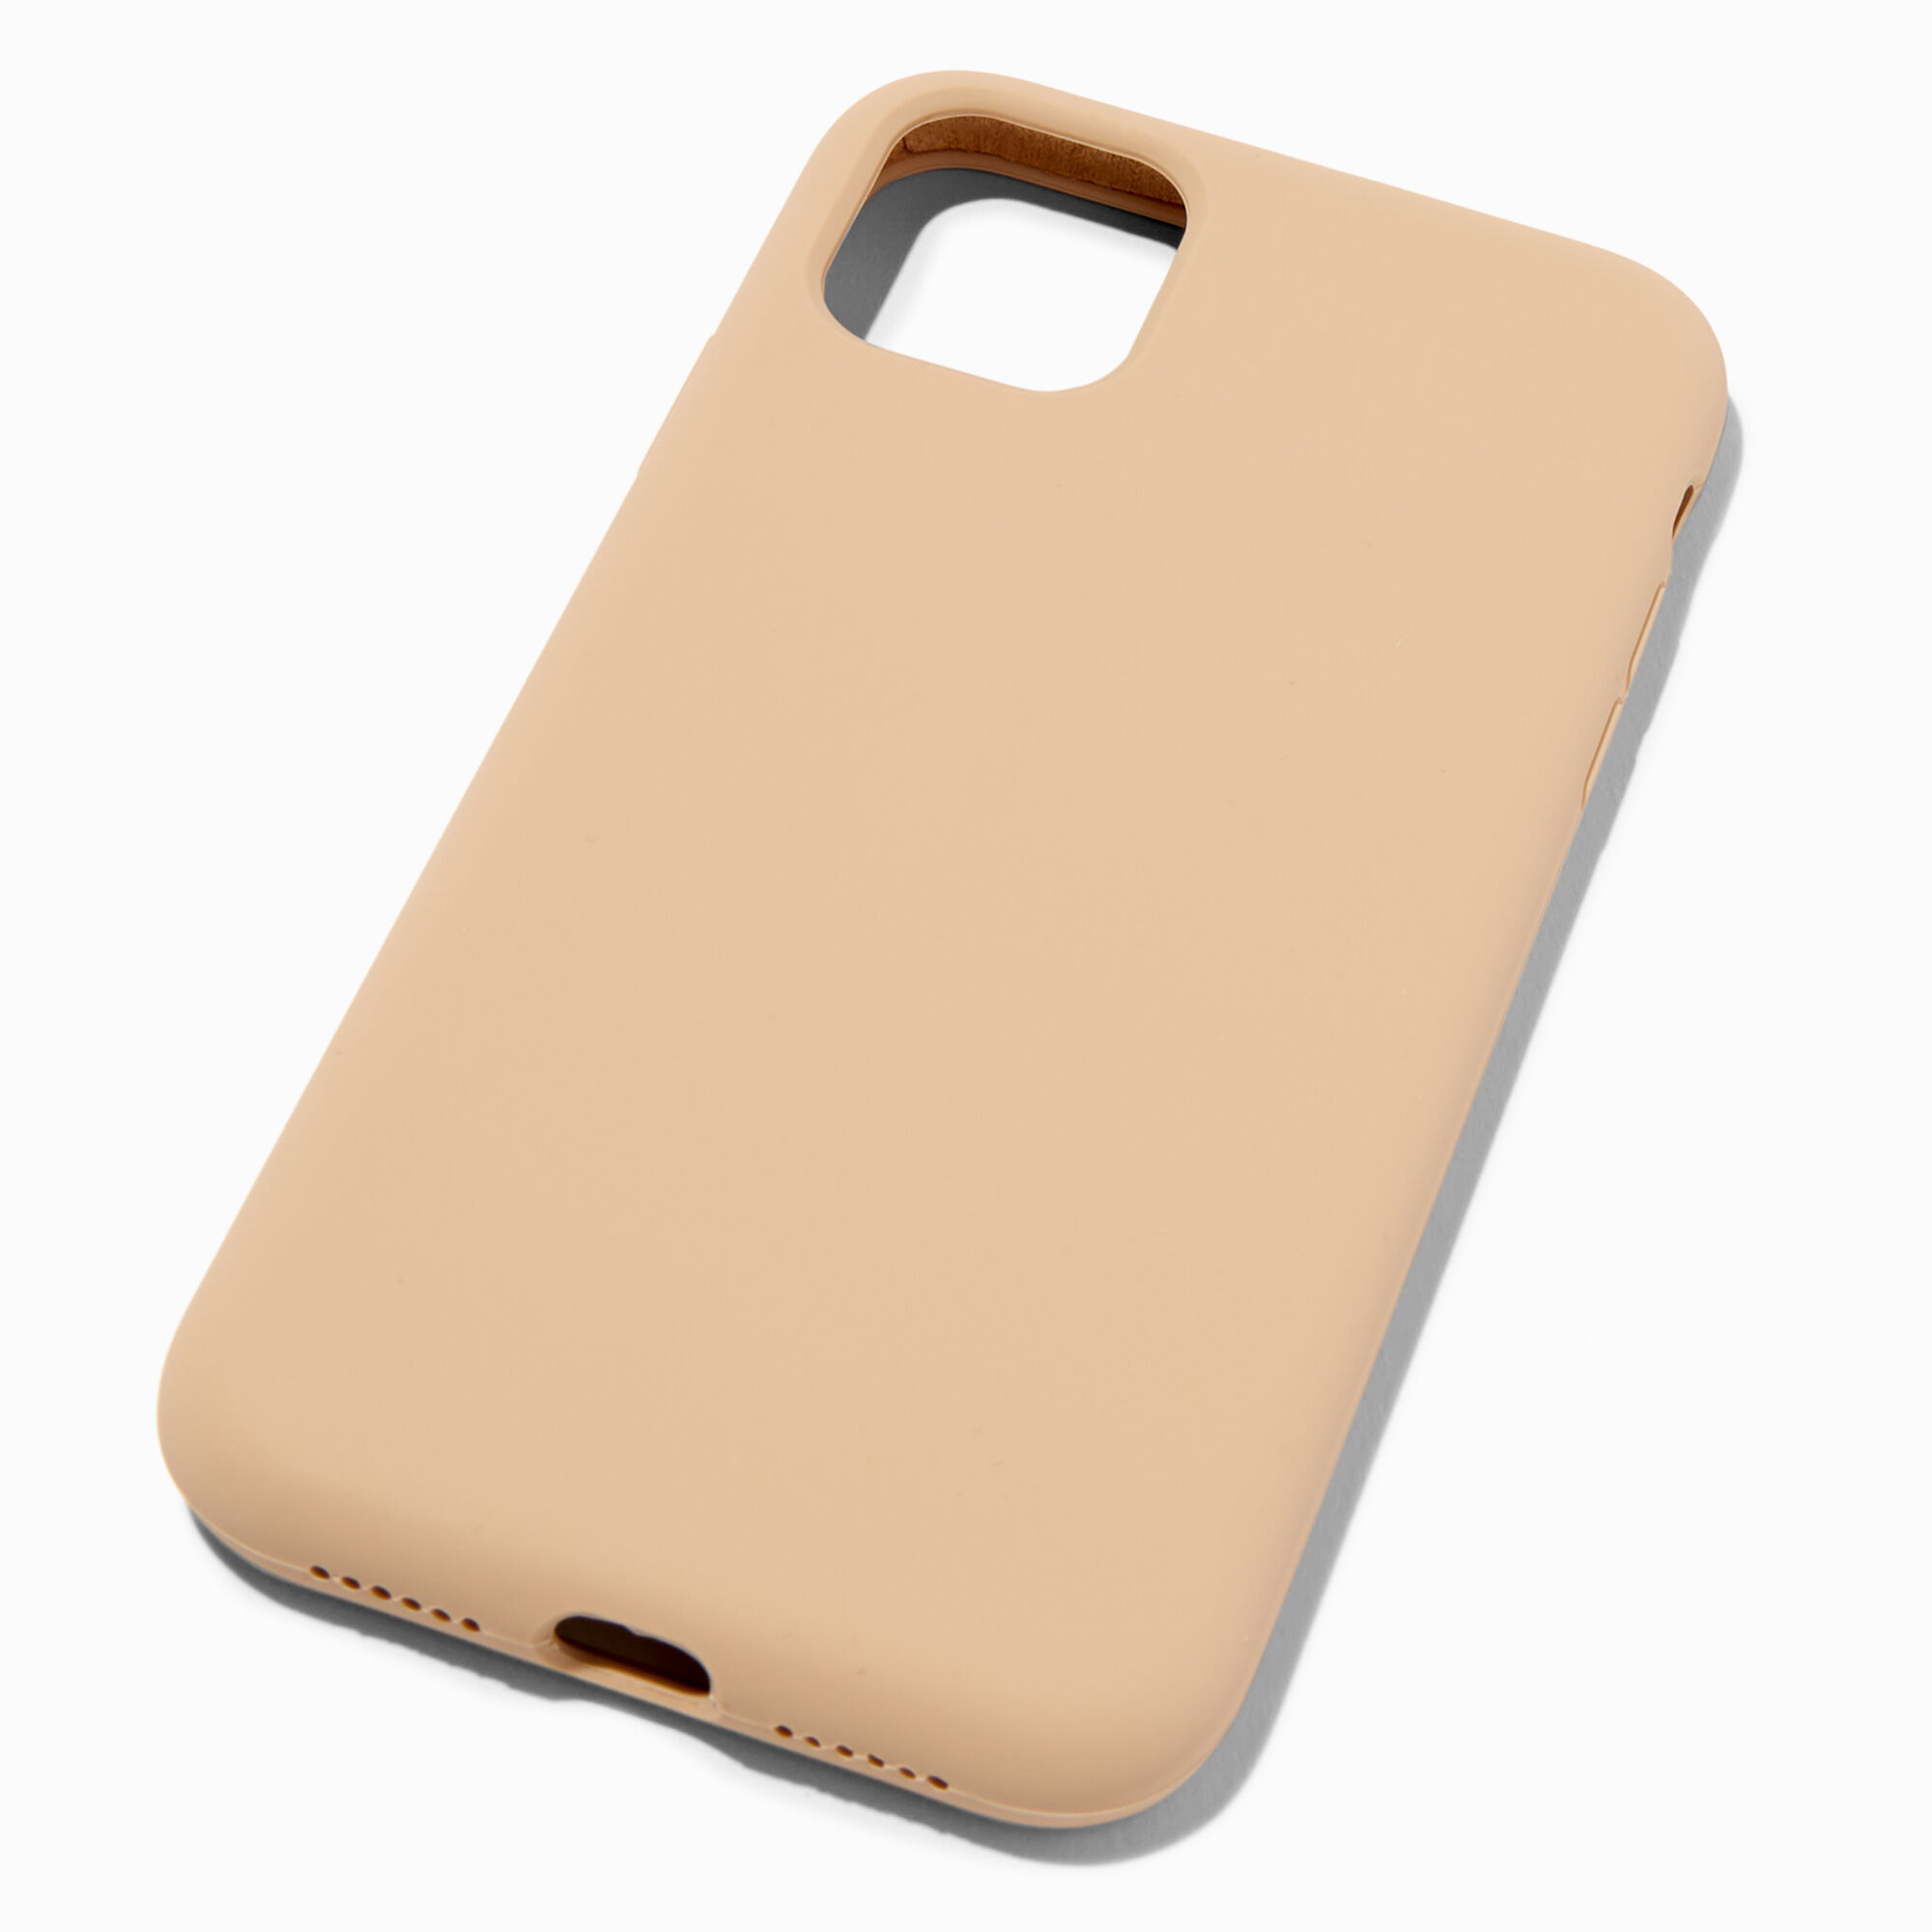 View Claires Solid Silicone Phone Case Fits Iphone 11 Tan information